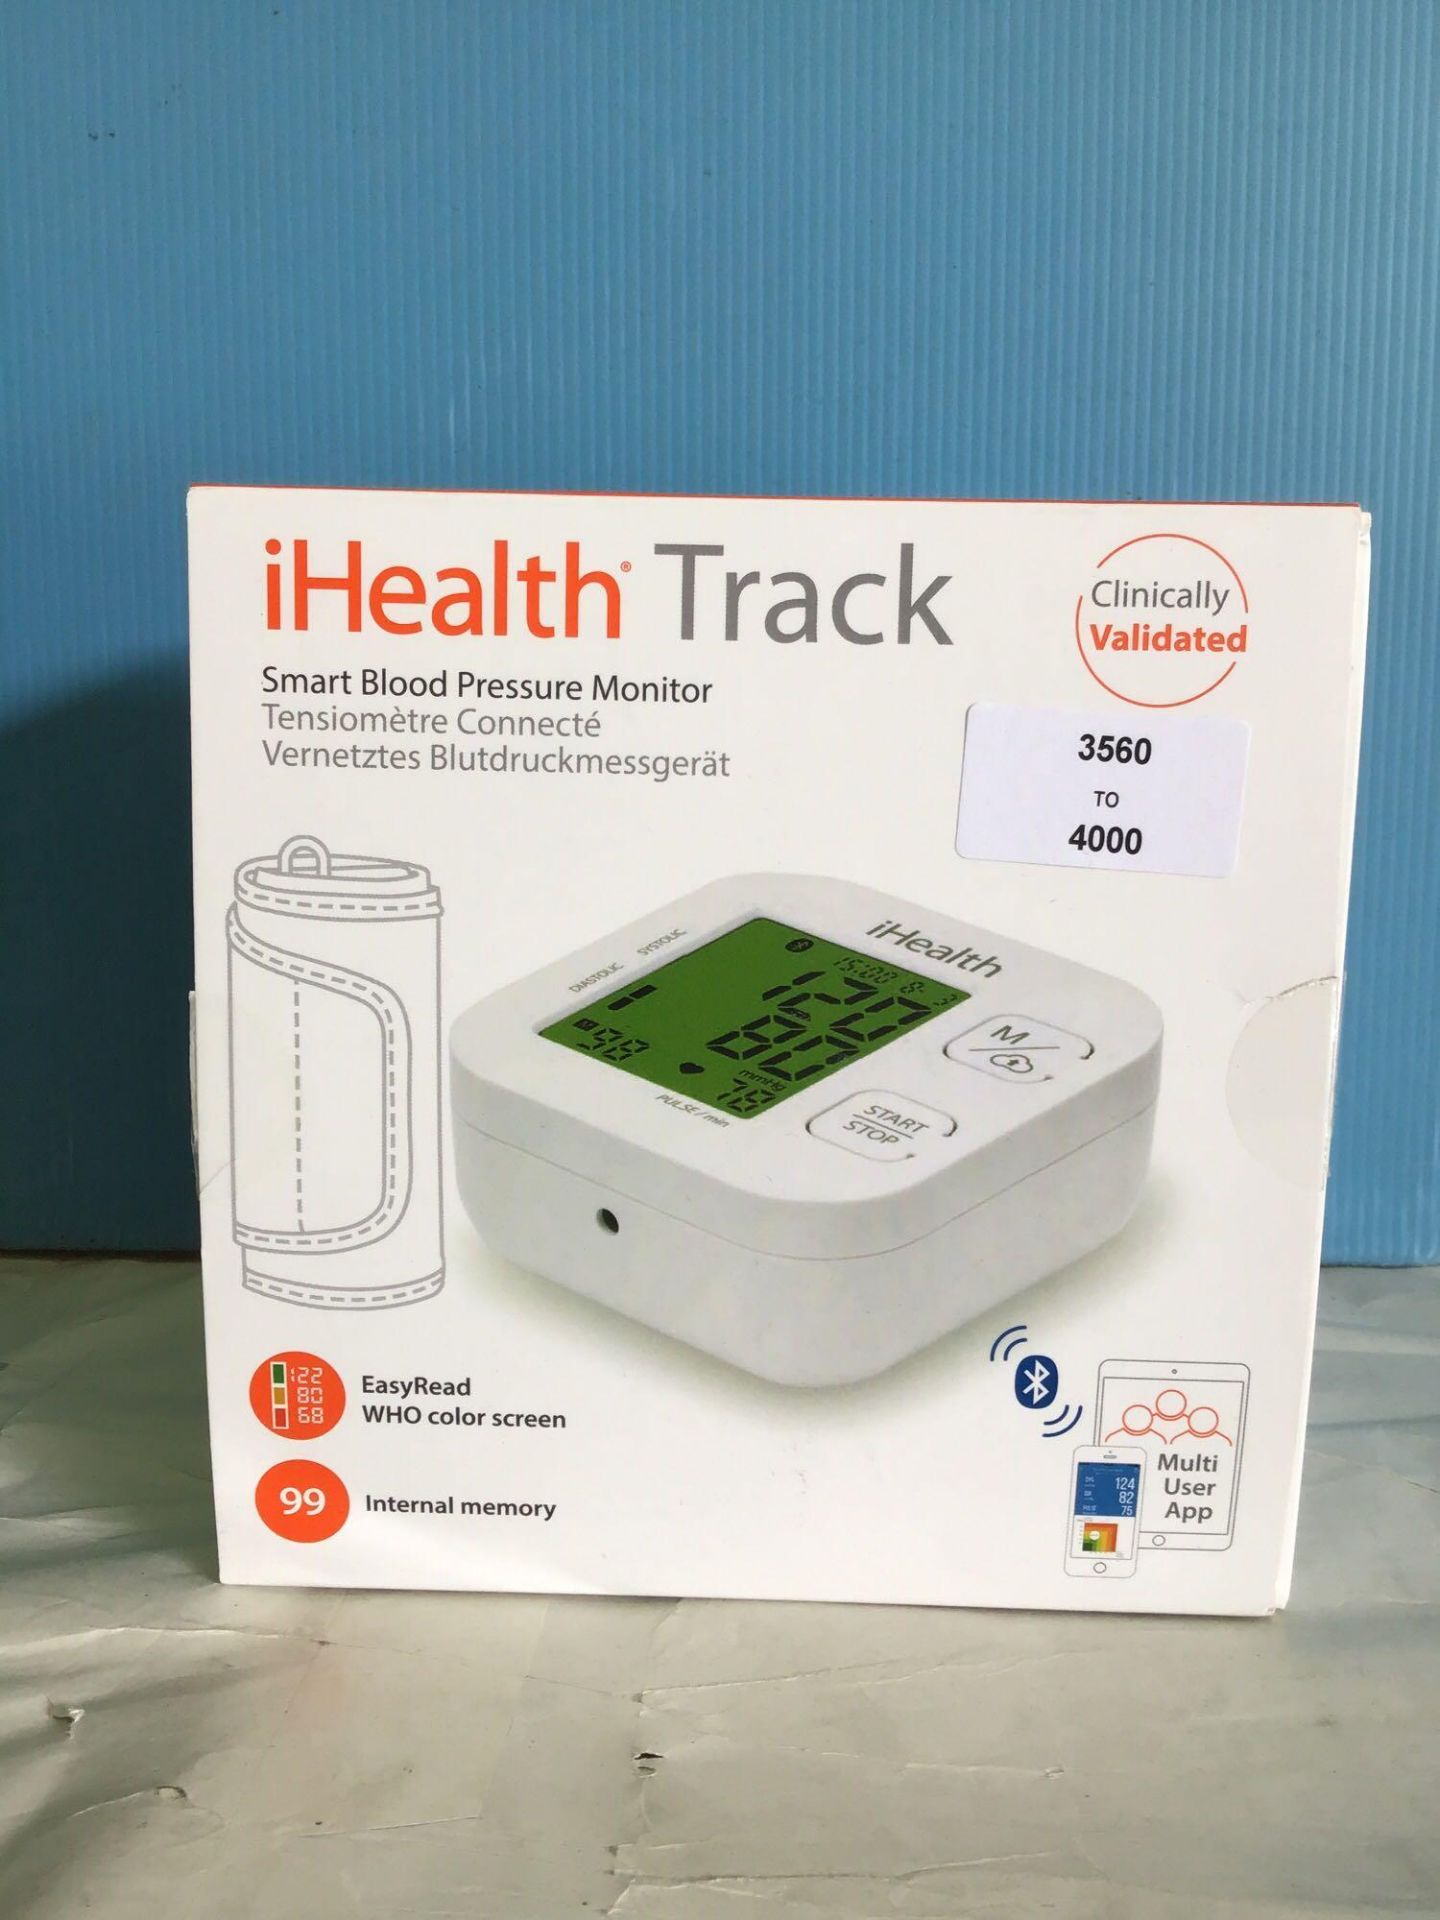 Connected Blood Pressure Monitor – iHealth Track - Image 2 of 5